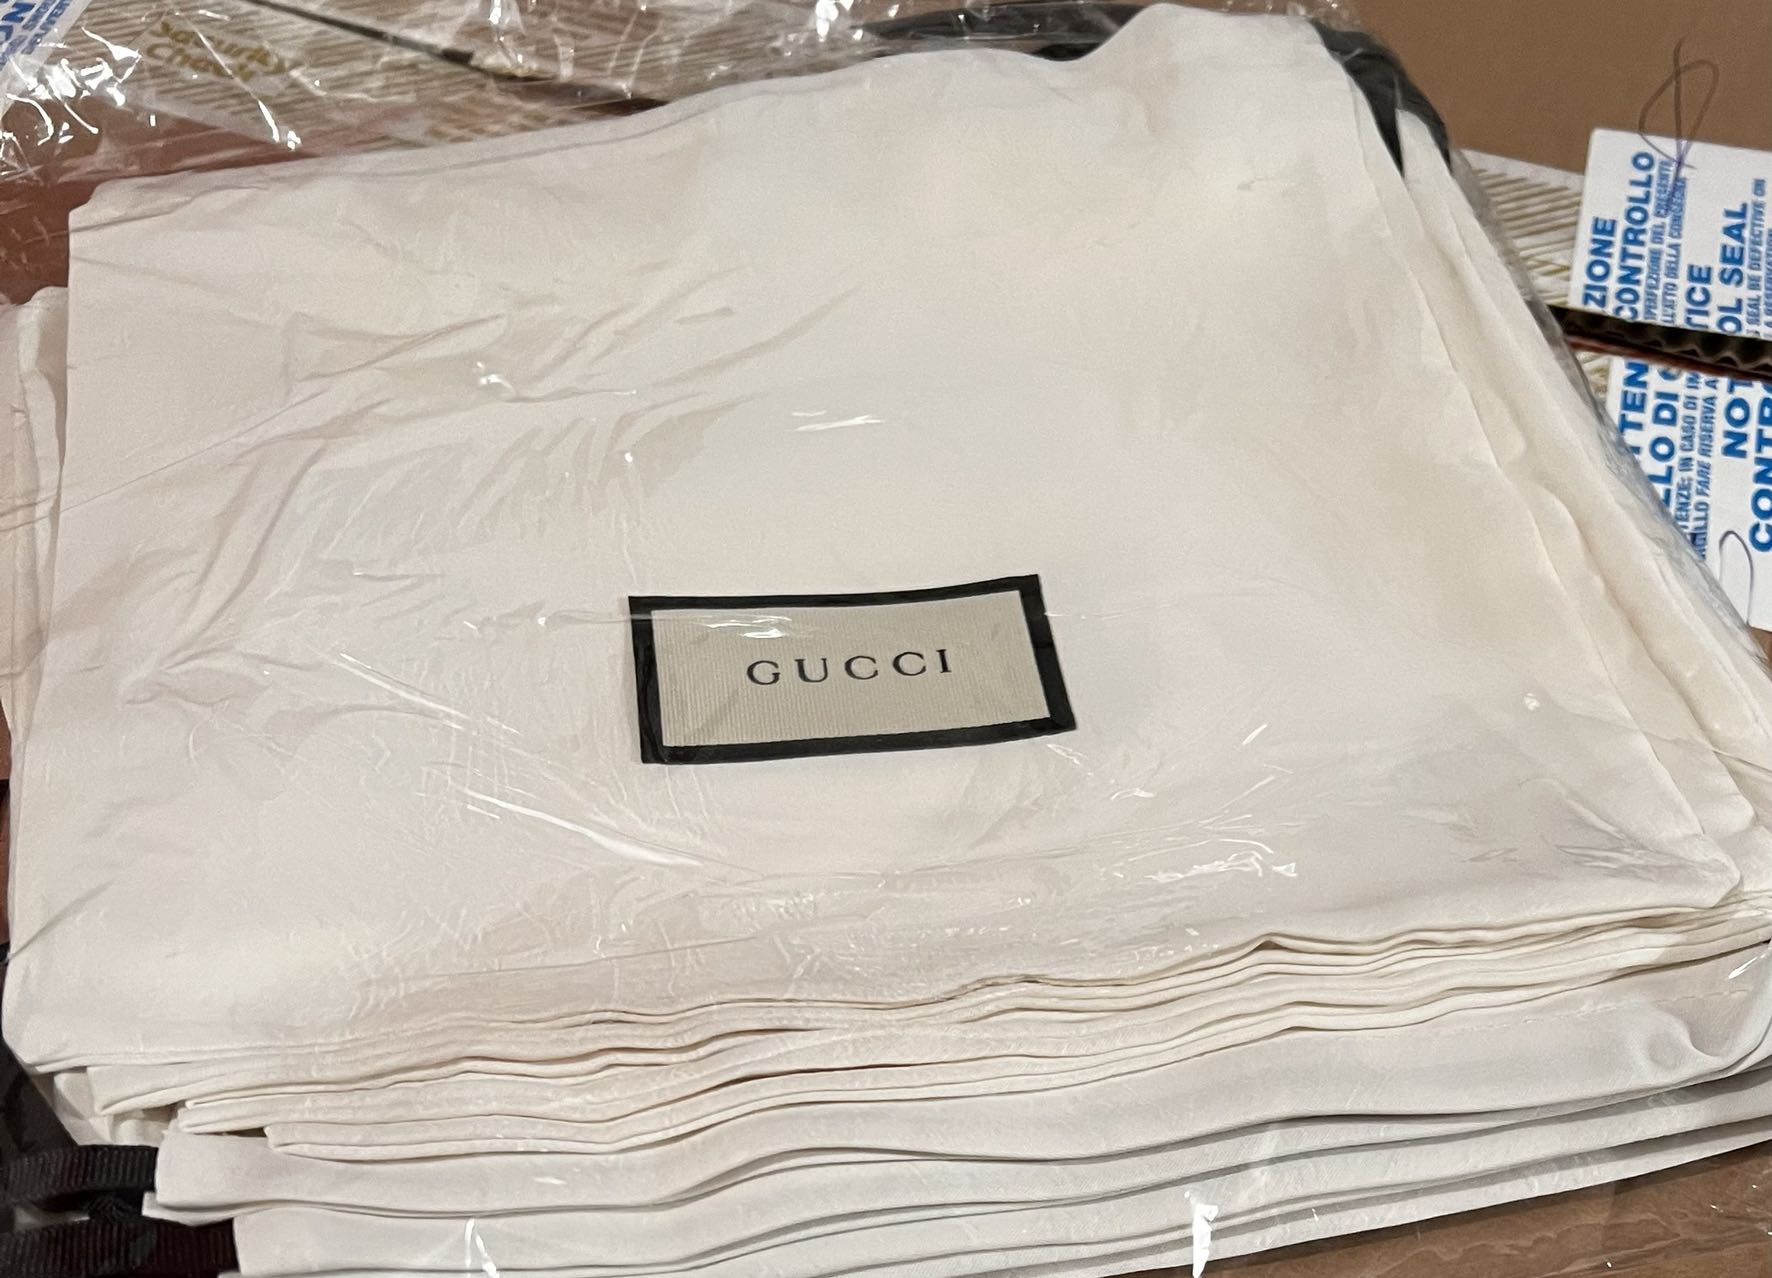 47117 - GUCCI BELTS CARRYOVERS Europe